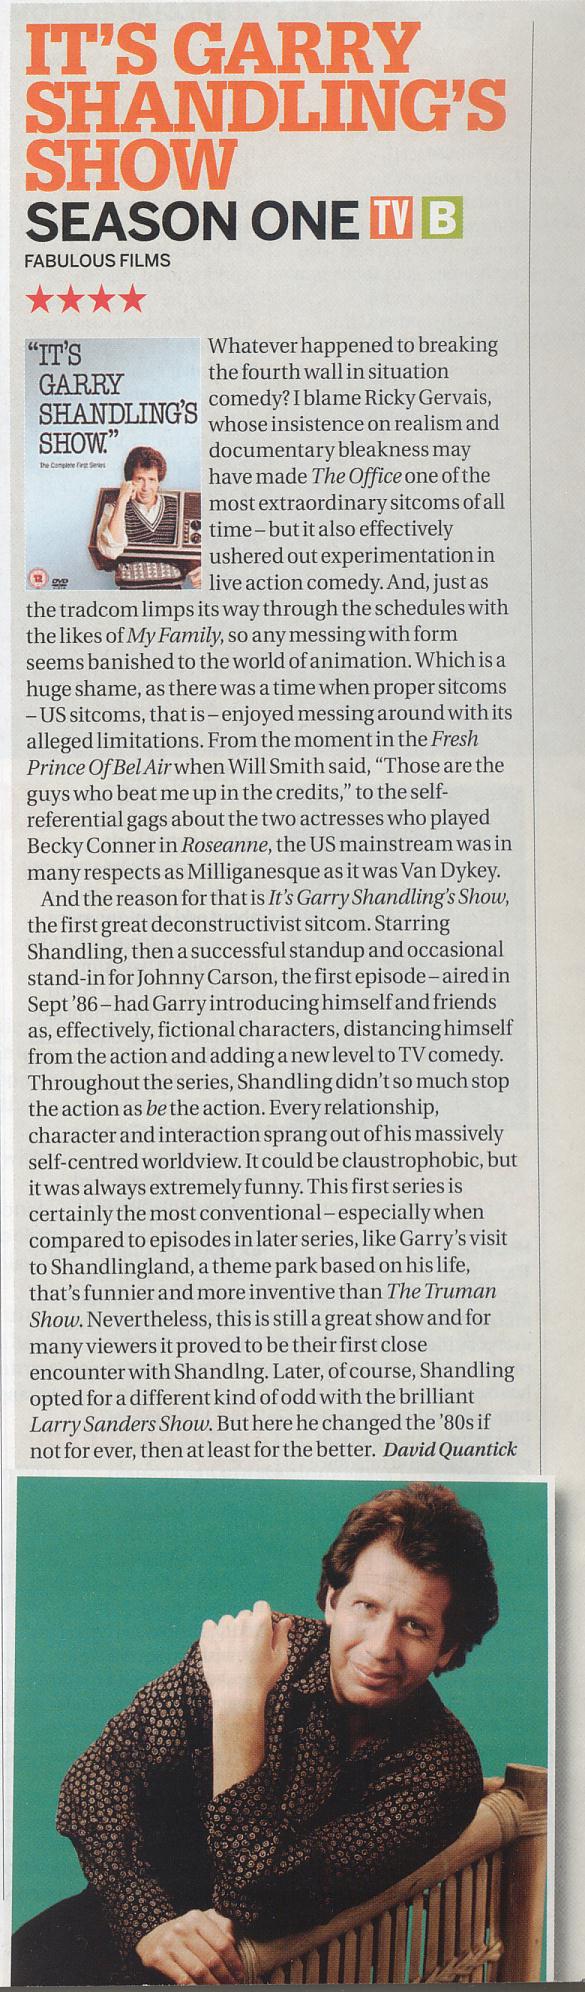 Garry Shandling's Show - review from Uncut magazine